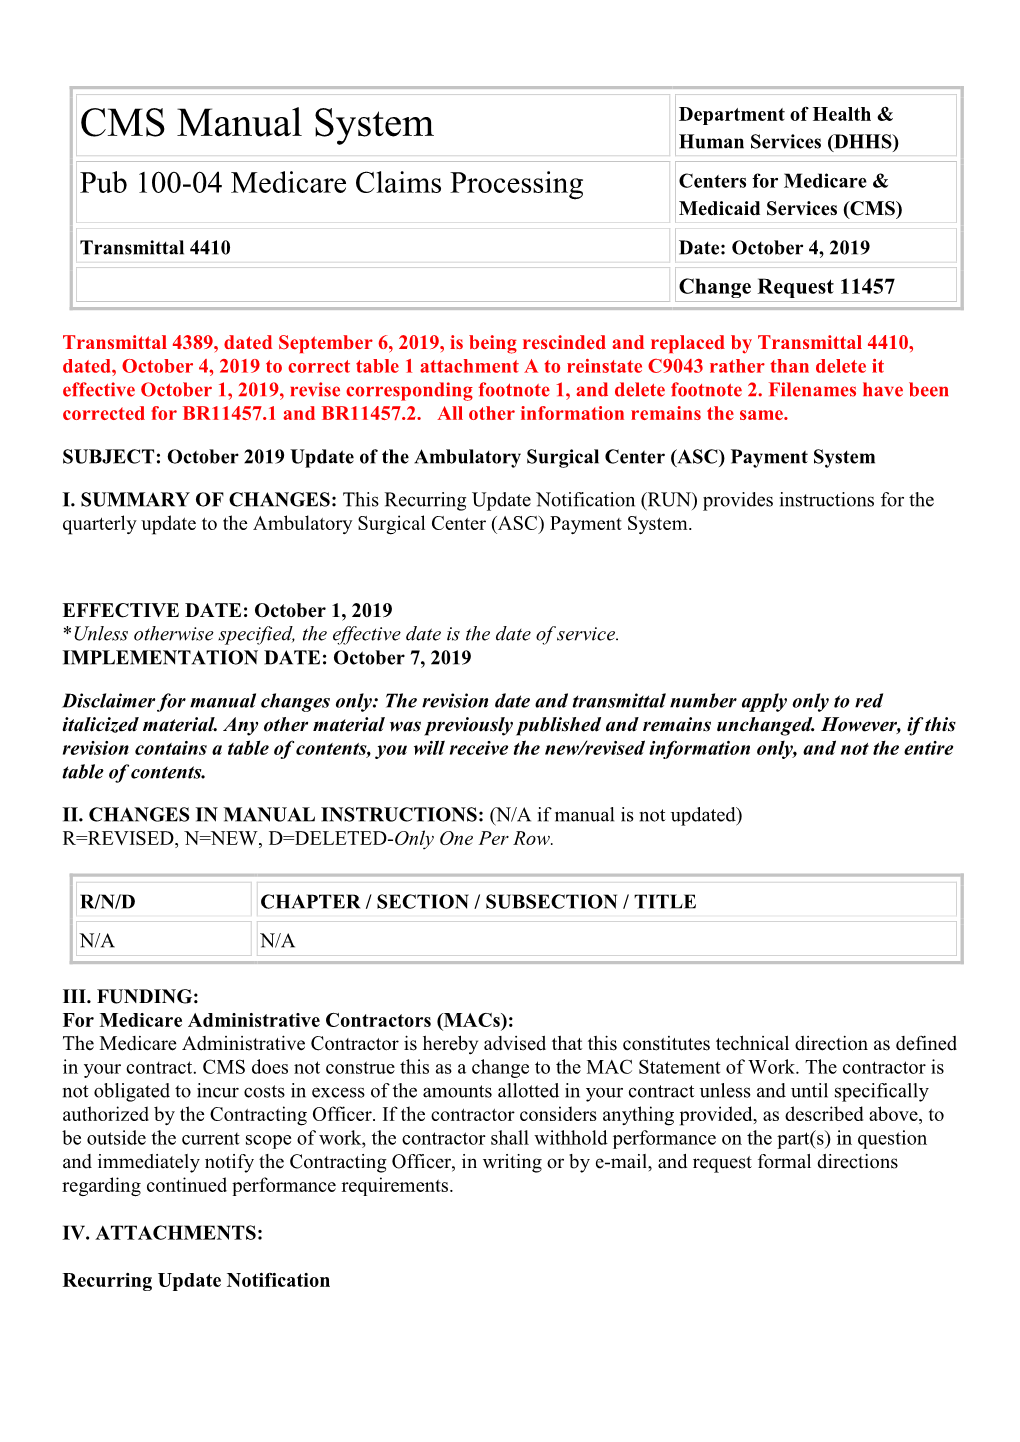 Pub 100-04 Medicare Claims Processing Centers for Medicare & Medicaid Services (CMS) Transmittal 4410 Date: October 4, 2019 Change Request 11457